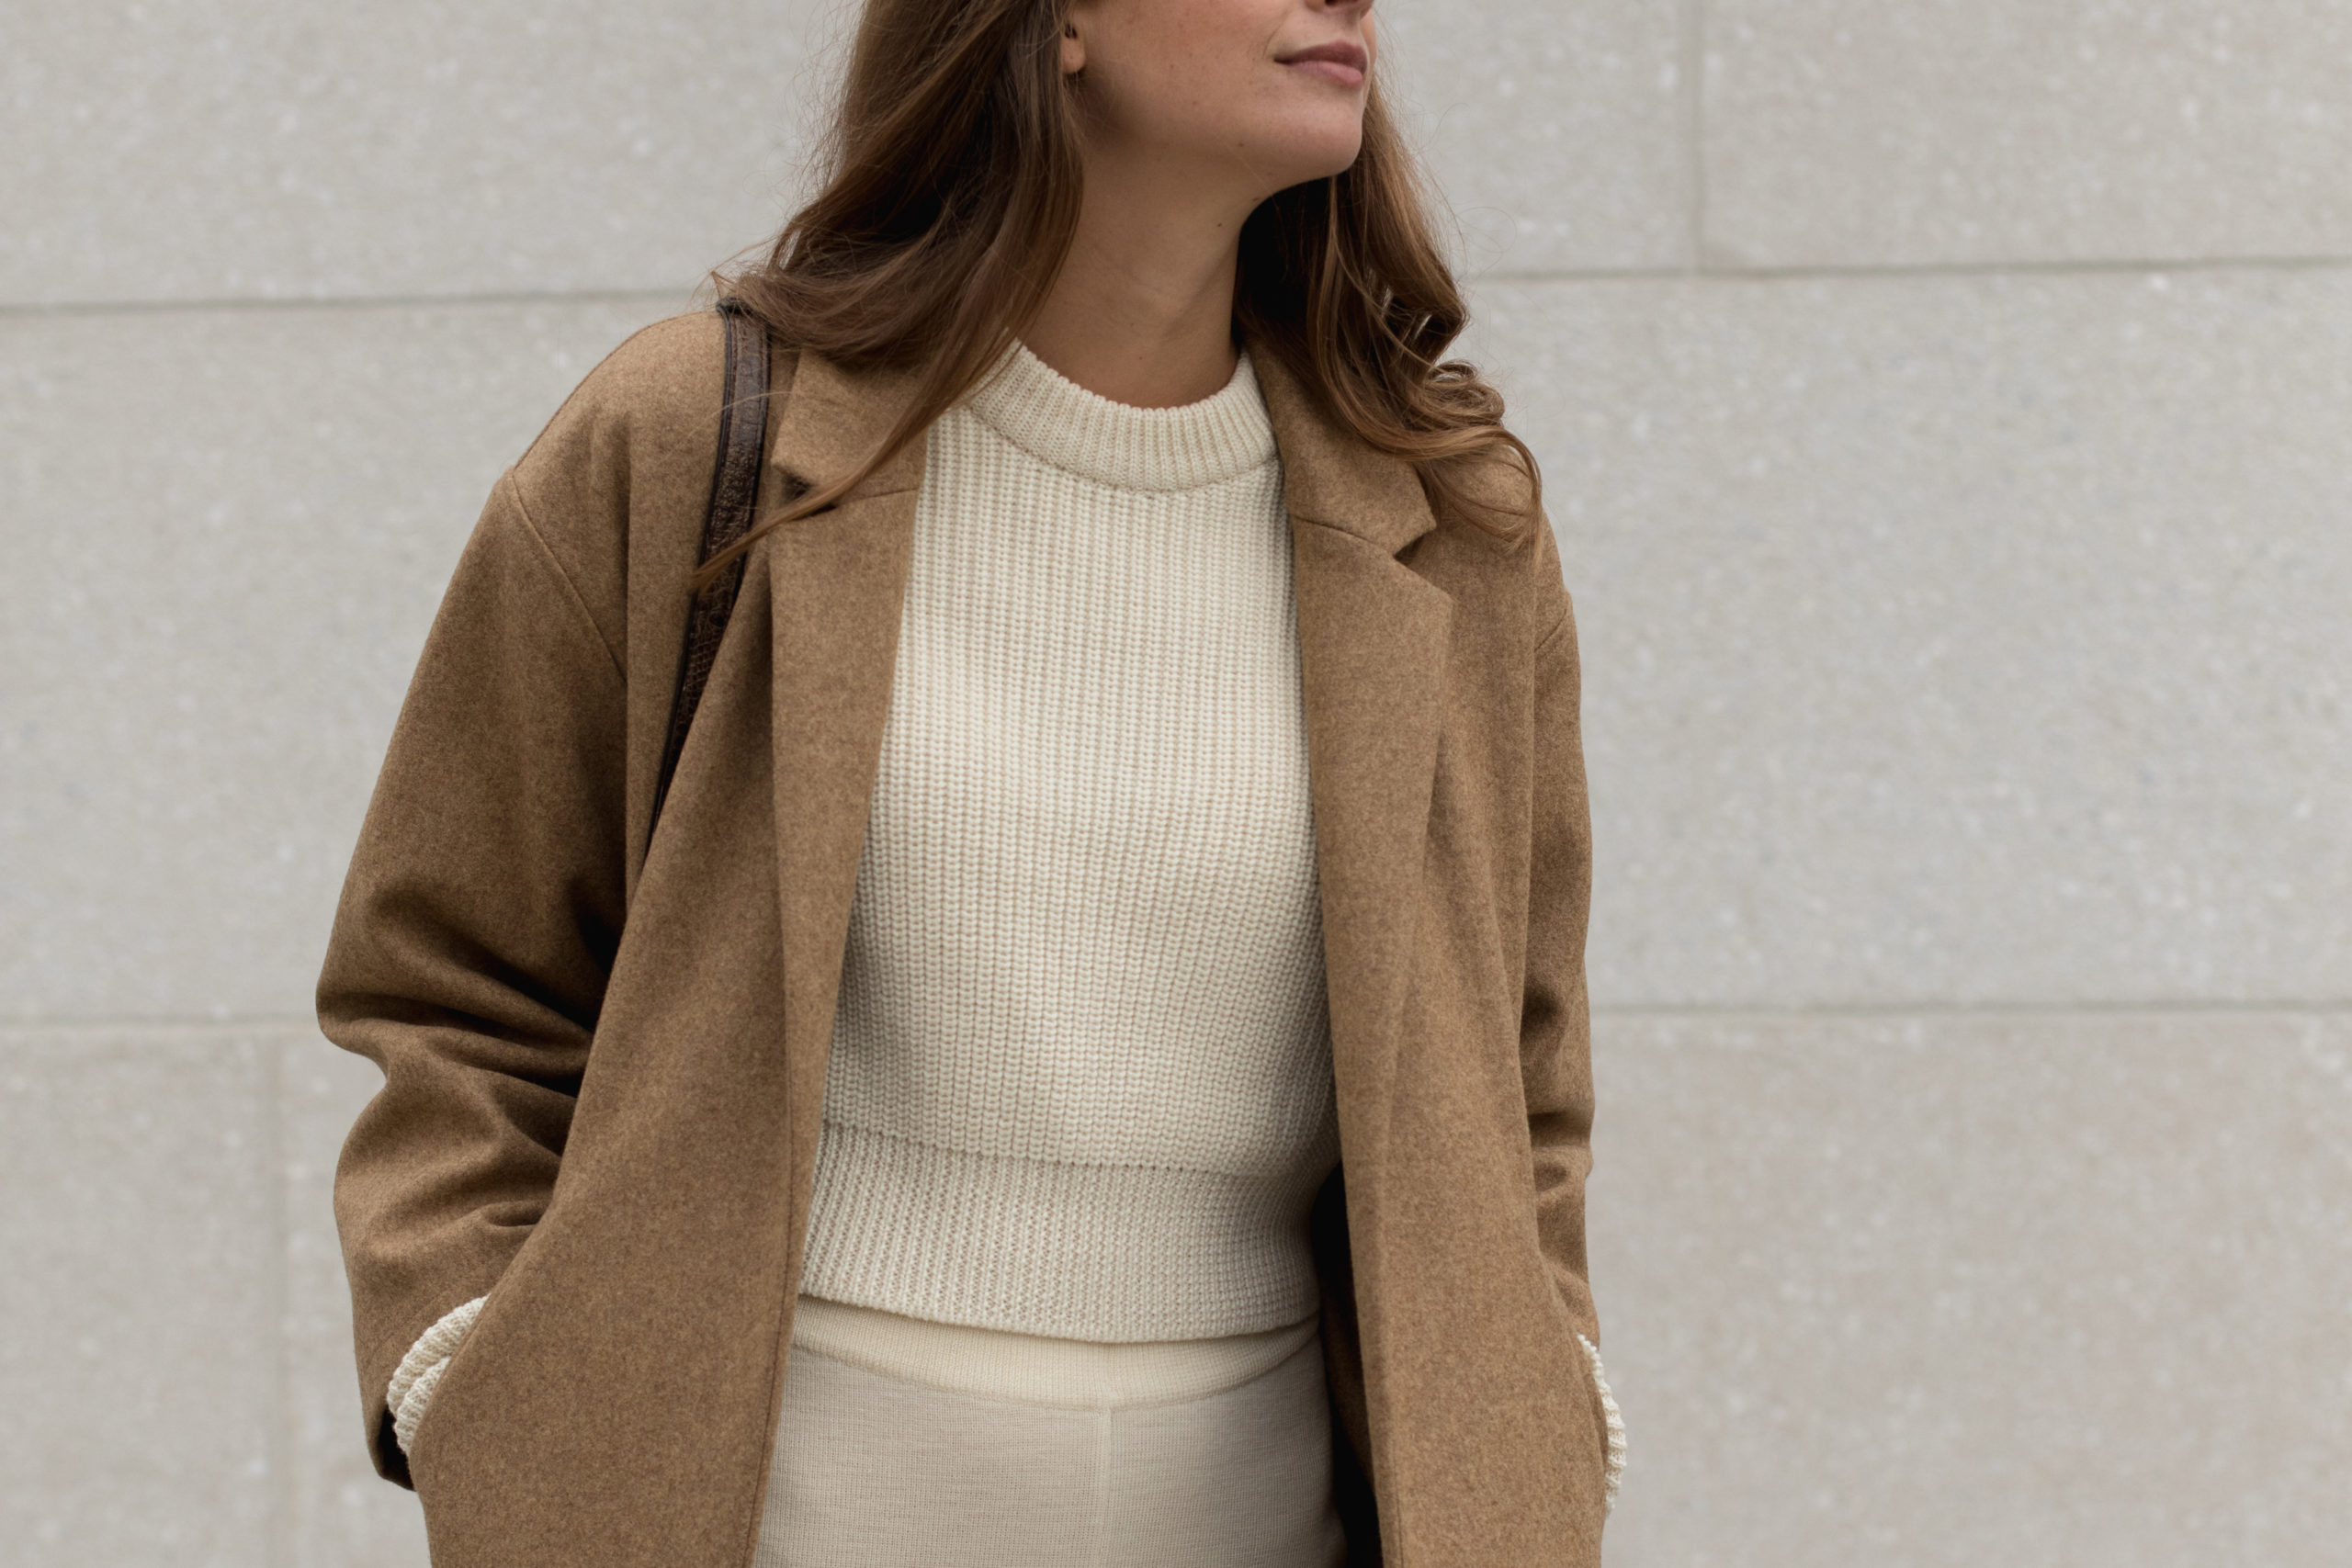 Wool Overcoat in Camel by The Slow Label